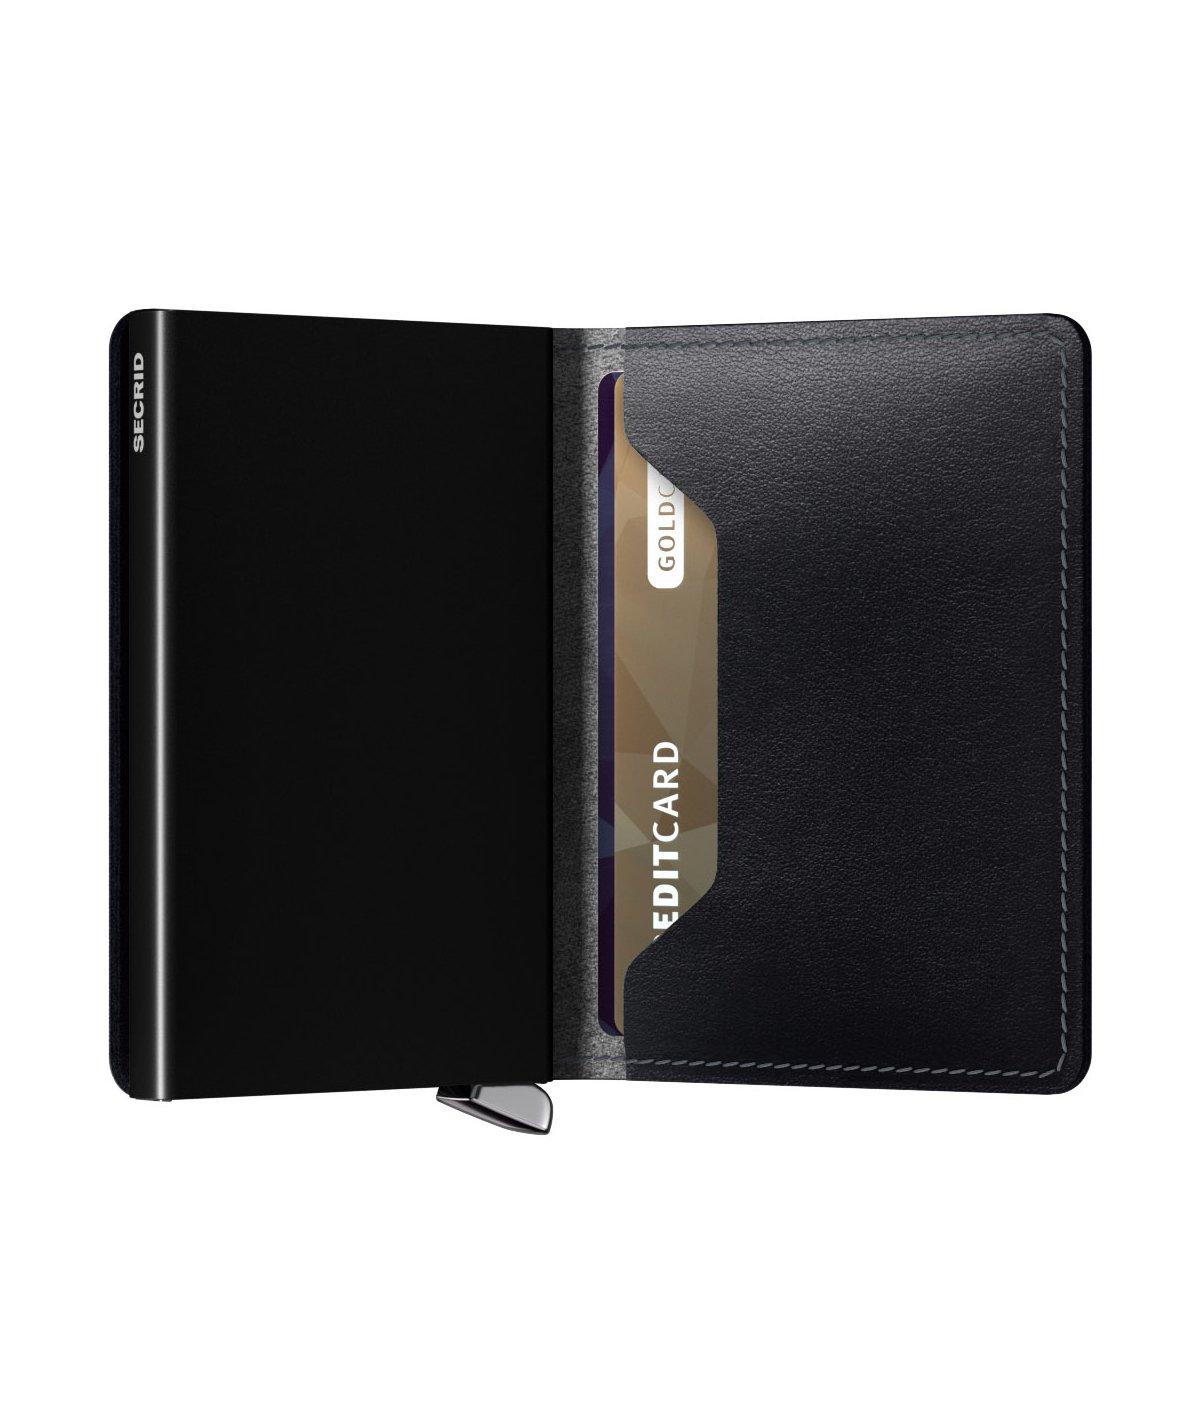 Premium Collection Leather Slim Wallet image 3